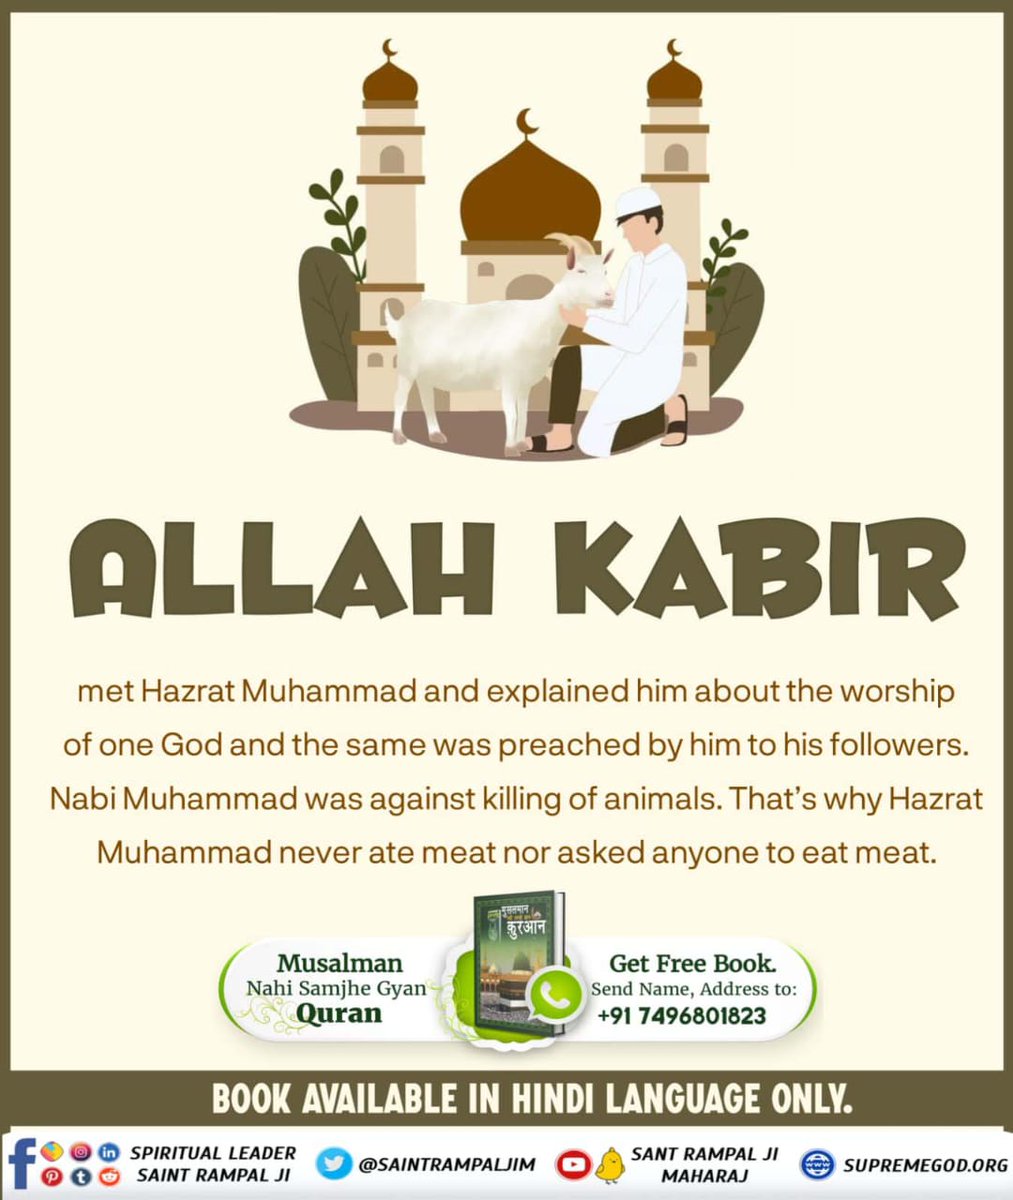 ALLAH KABIR
met Hazrat Muhammad and explained him about the worship of one God and the same was preached by him to his followers. Nabi Muhammad was against killing of animals. That's why Hazrat Muhammad never ate meat nor asked anyone to eat meat.
#GodMorningThursday